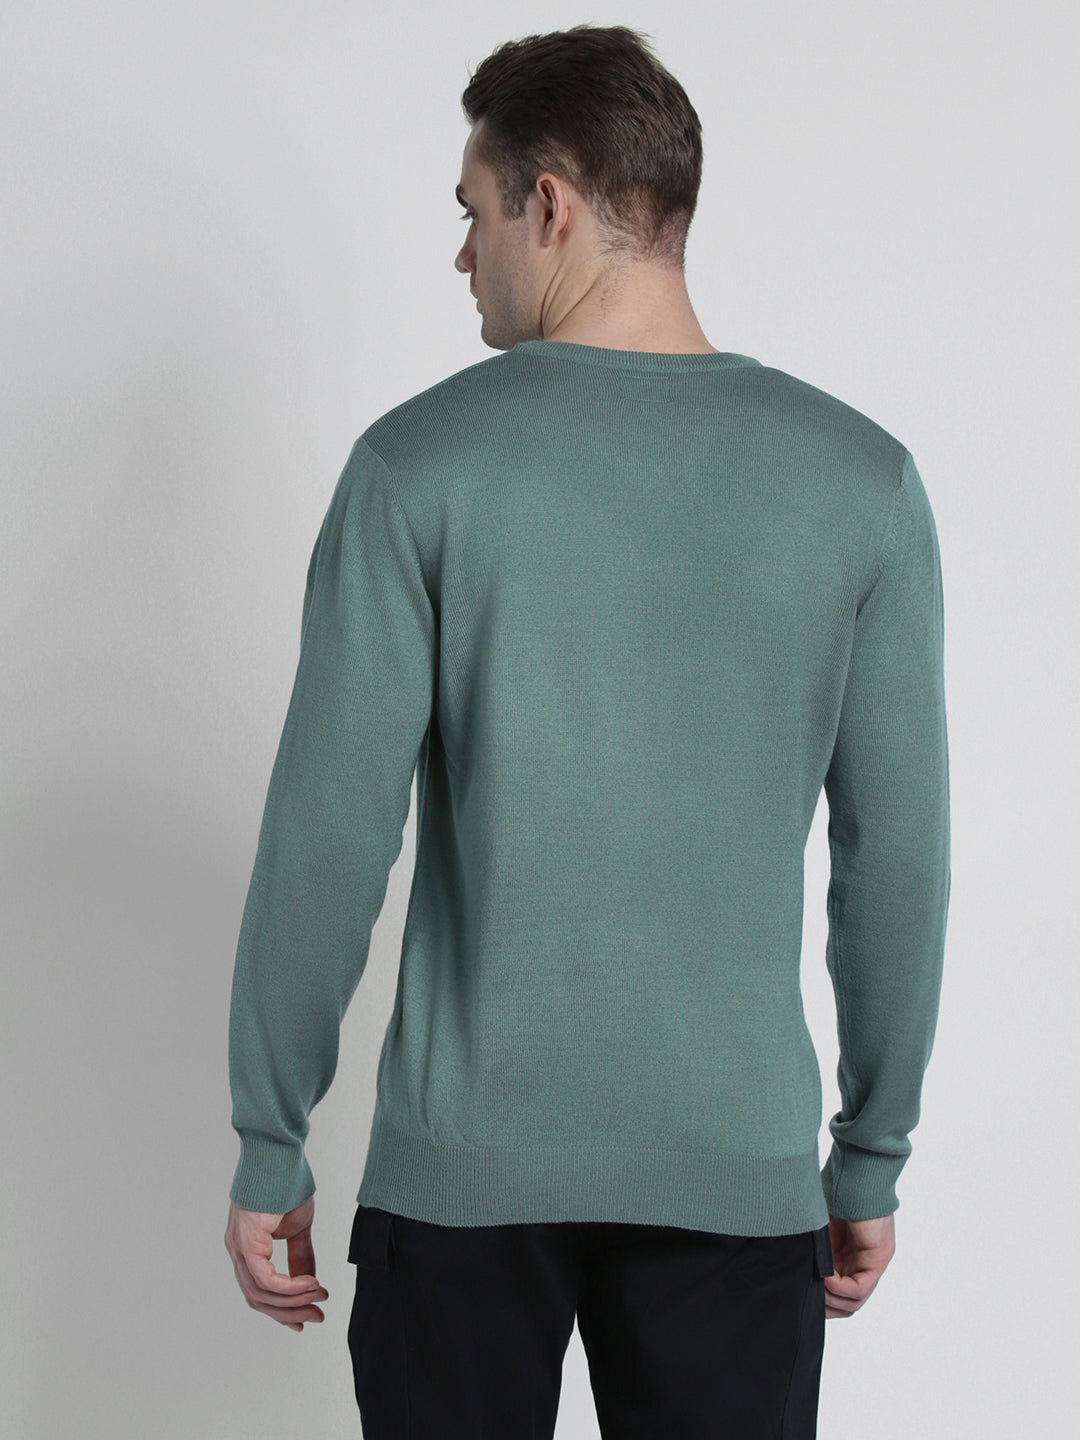 Dennis Lingo Men's Teal Green Tipping  Full Sleeves Pullover Sweater